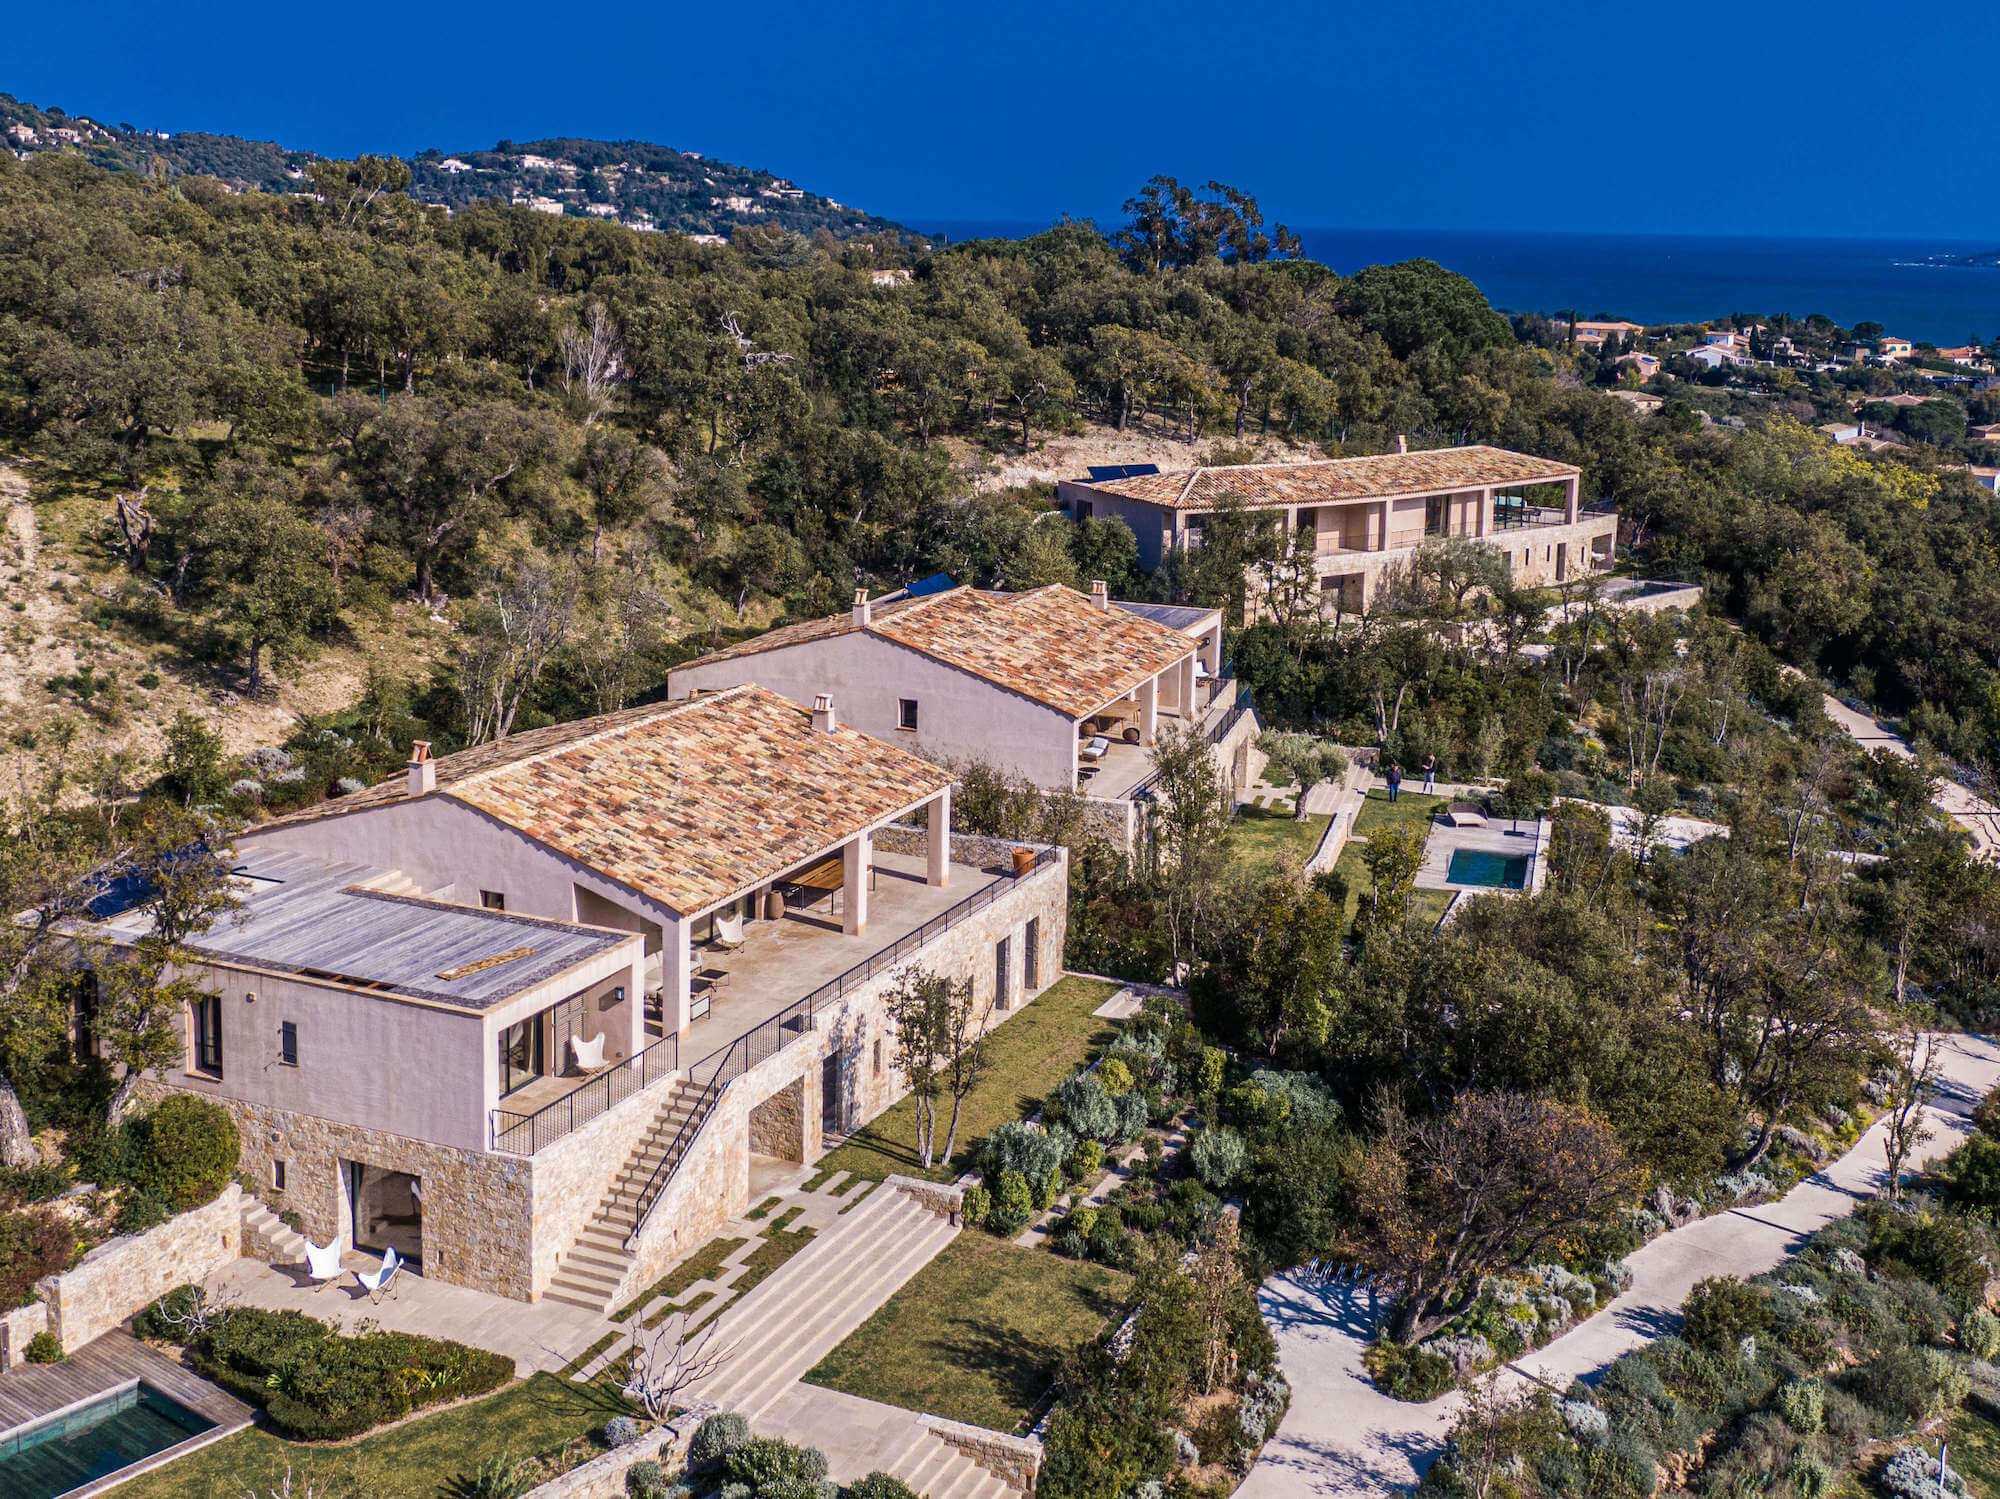 An exceptional seaside estate for a seminar on the Côte d'Azur 